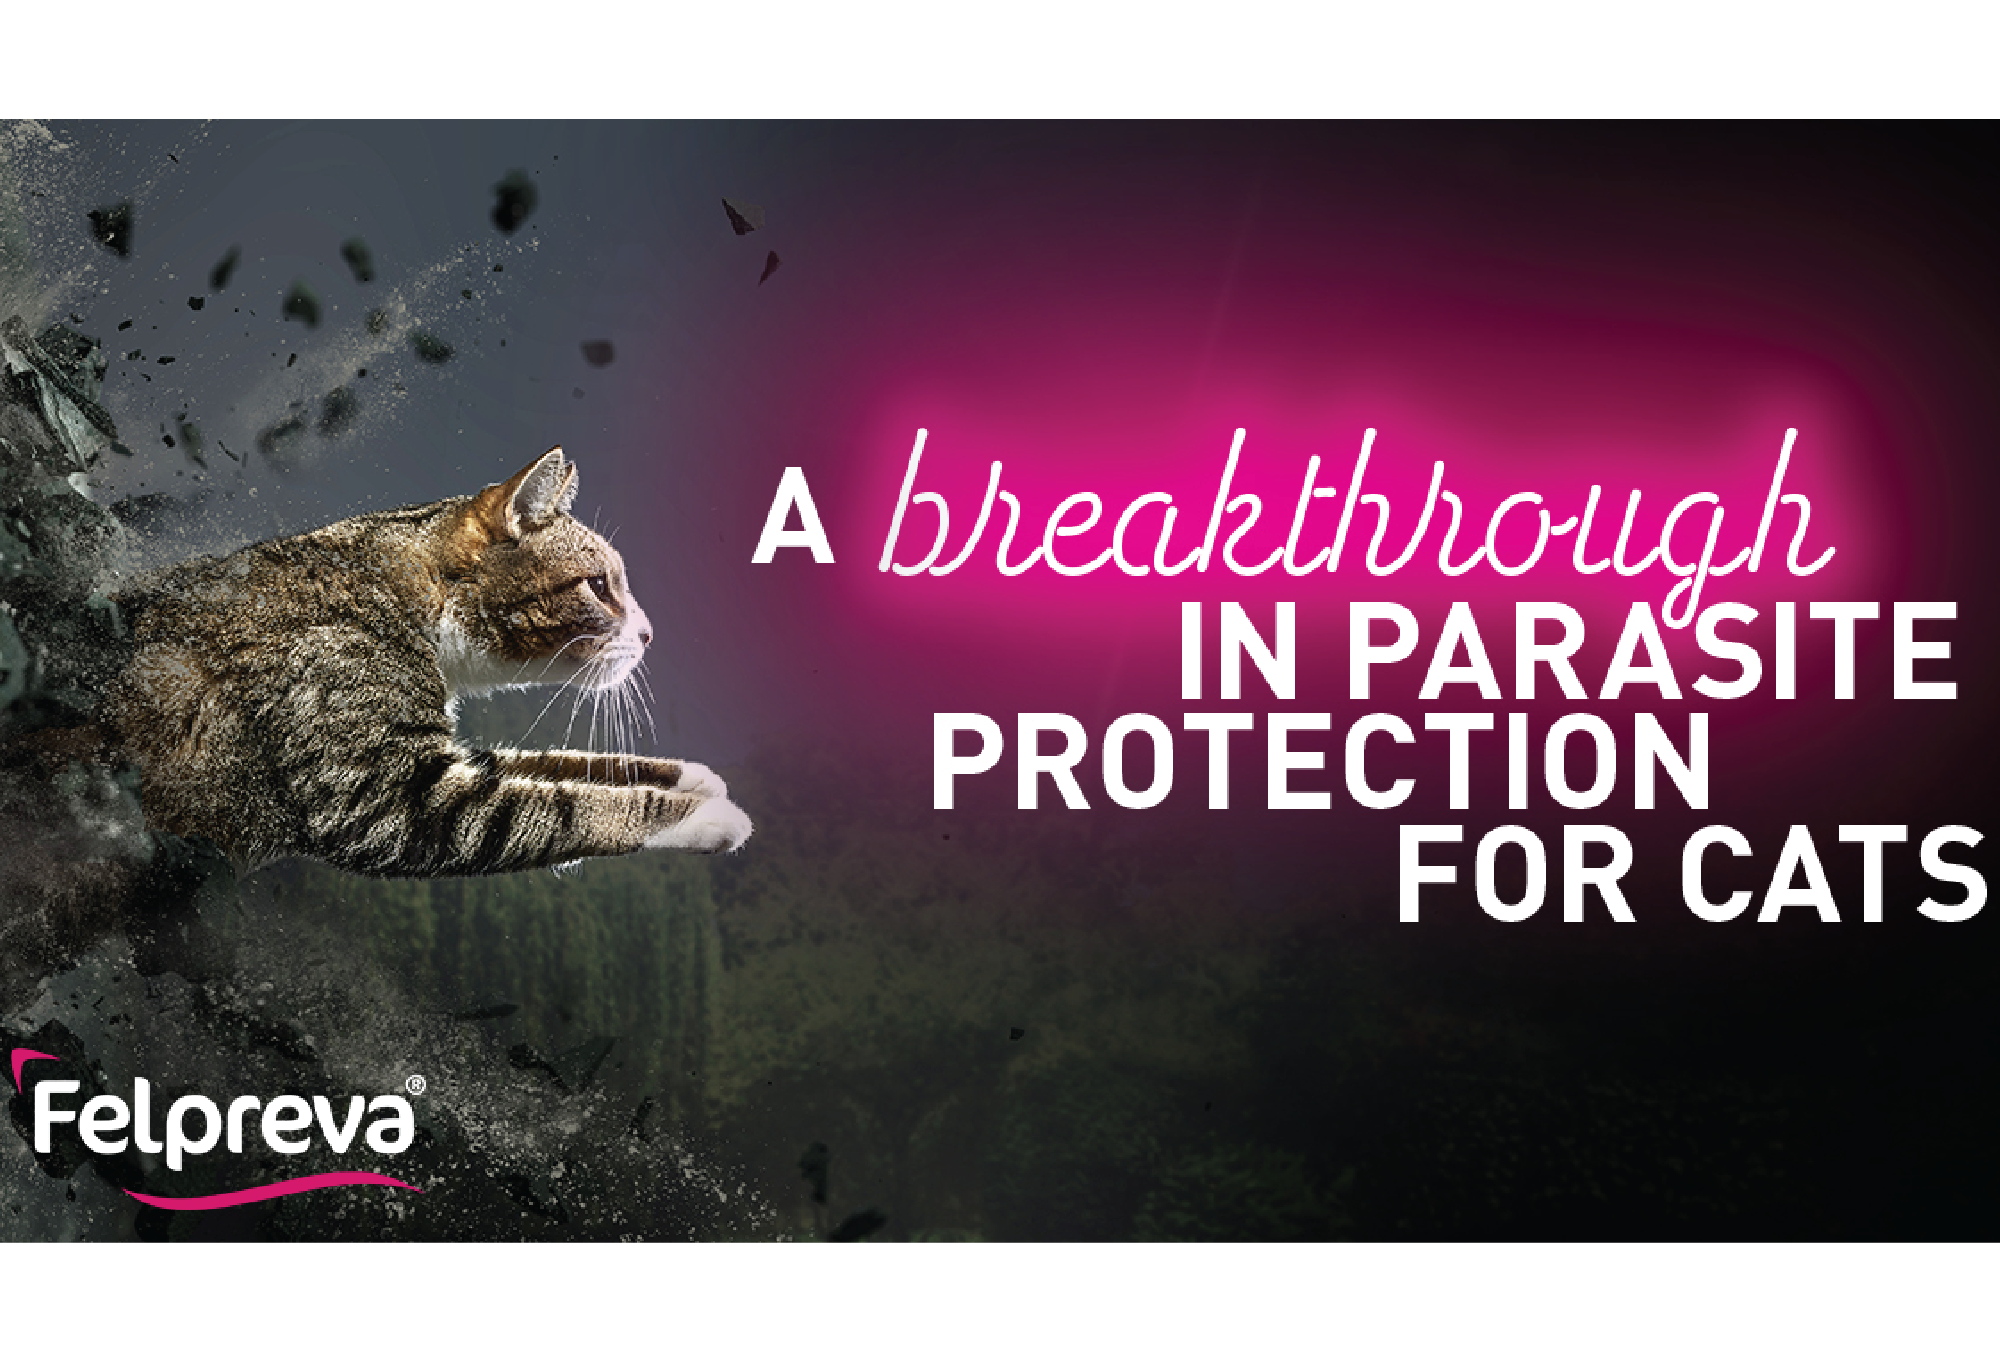 Felpreva - a breakthrough in parasite protection for cats. Protect your feline friend from fleas, ticks and worms with this new spot-on treatments. 